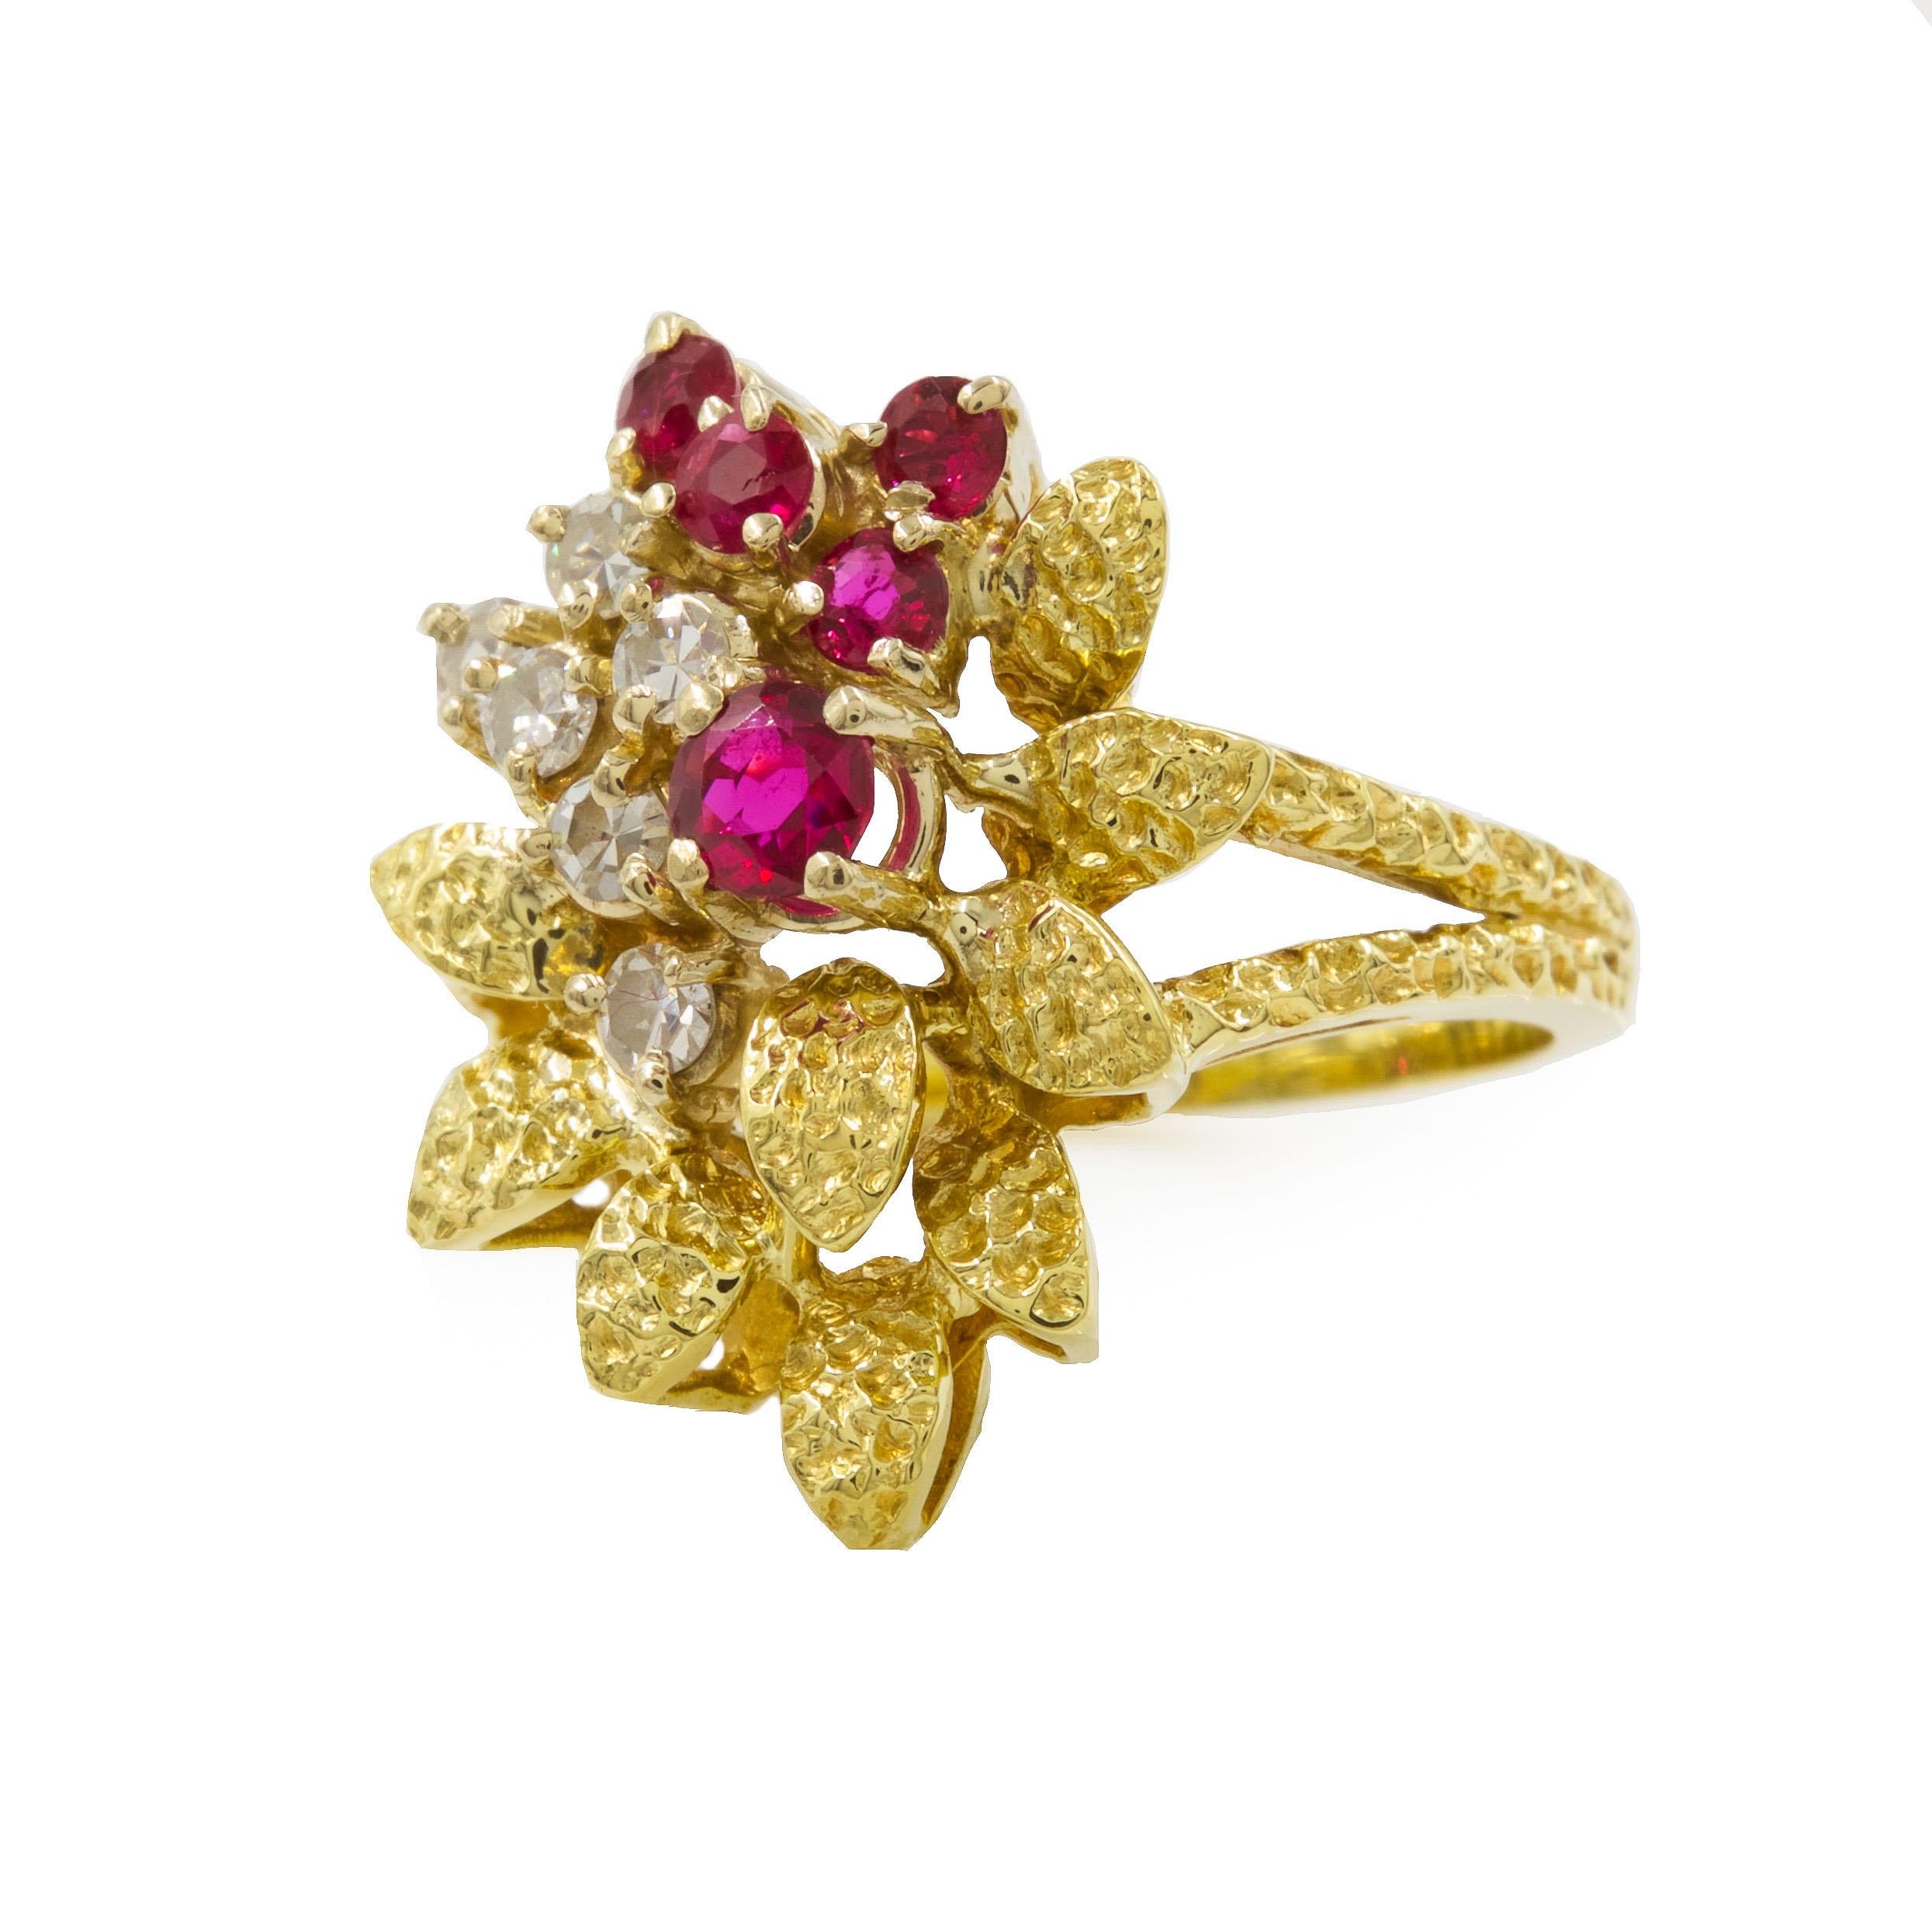 VINTAGE 14K YELLOW GOLD, RUBY AND DIAMOND COCKTAIL RING
With 5 rubies and 6 diamonds
Item # 109WJF22P

An elegant eye-catching cocktail ring with a playful composition, it features a wonderful splay of leaves with a chaotic textured surface